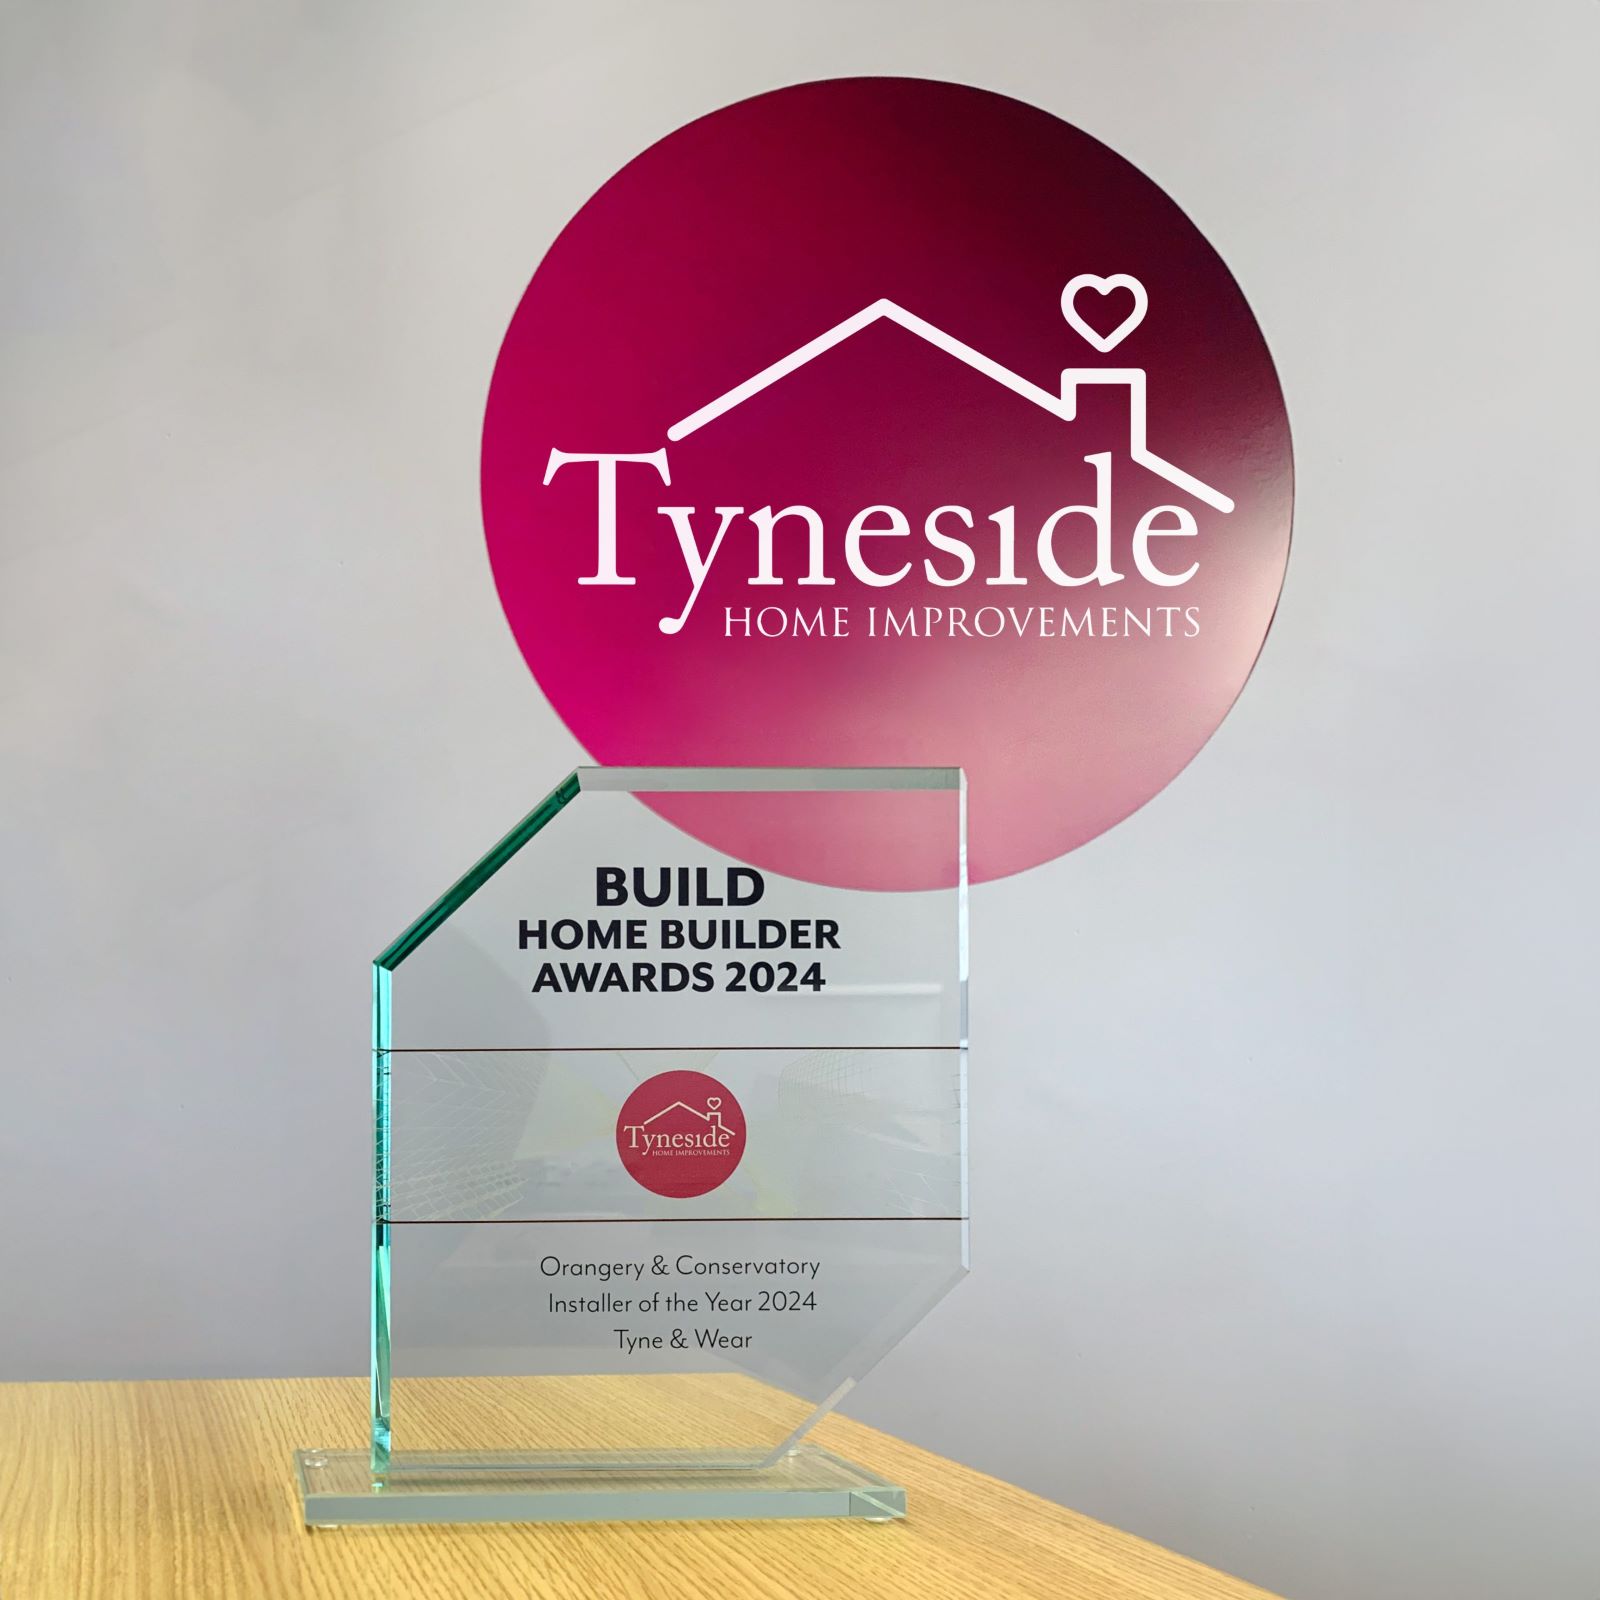 build home builder awards 2024 - orangery & conservatory installer of the year 2024 tyne & wear - tyneside home improvements